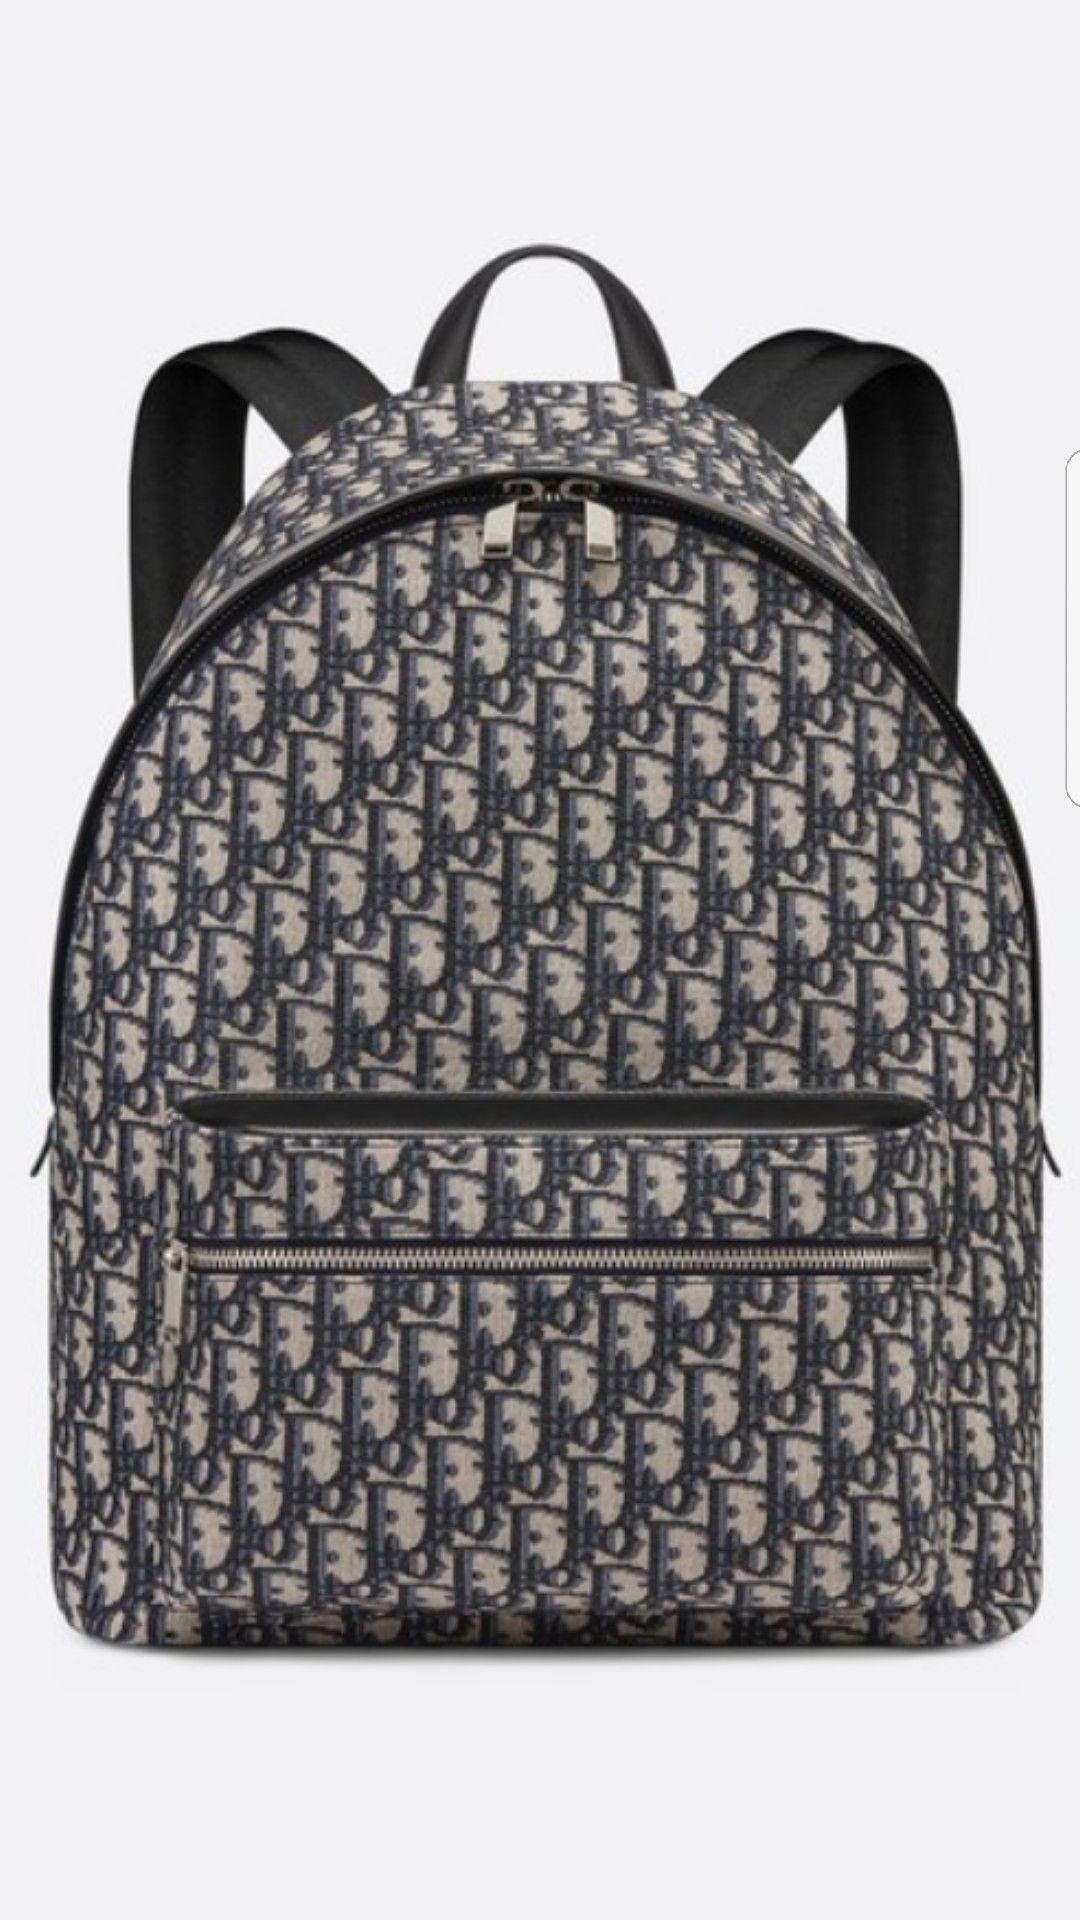 Christian Dior Backpack/Great Christmas Gift